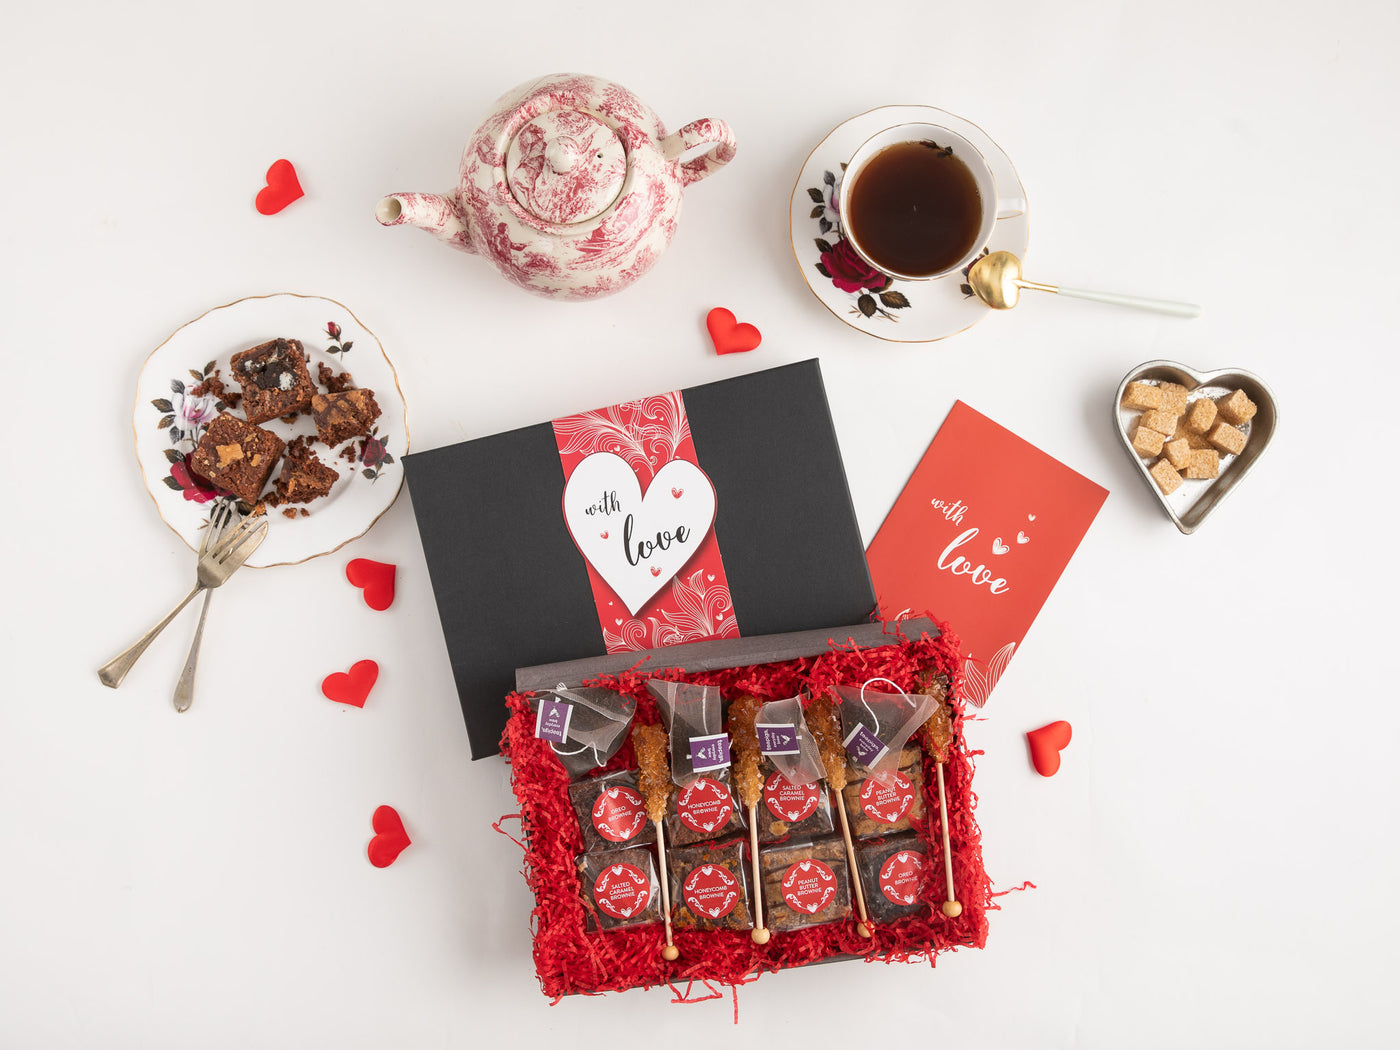 'With Love' Afternoon Tea For Four Valentine's Day Gift Box